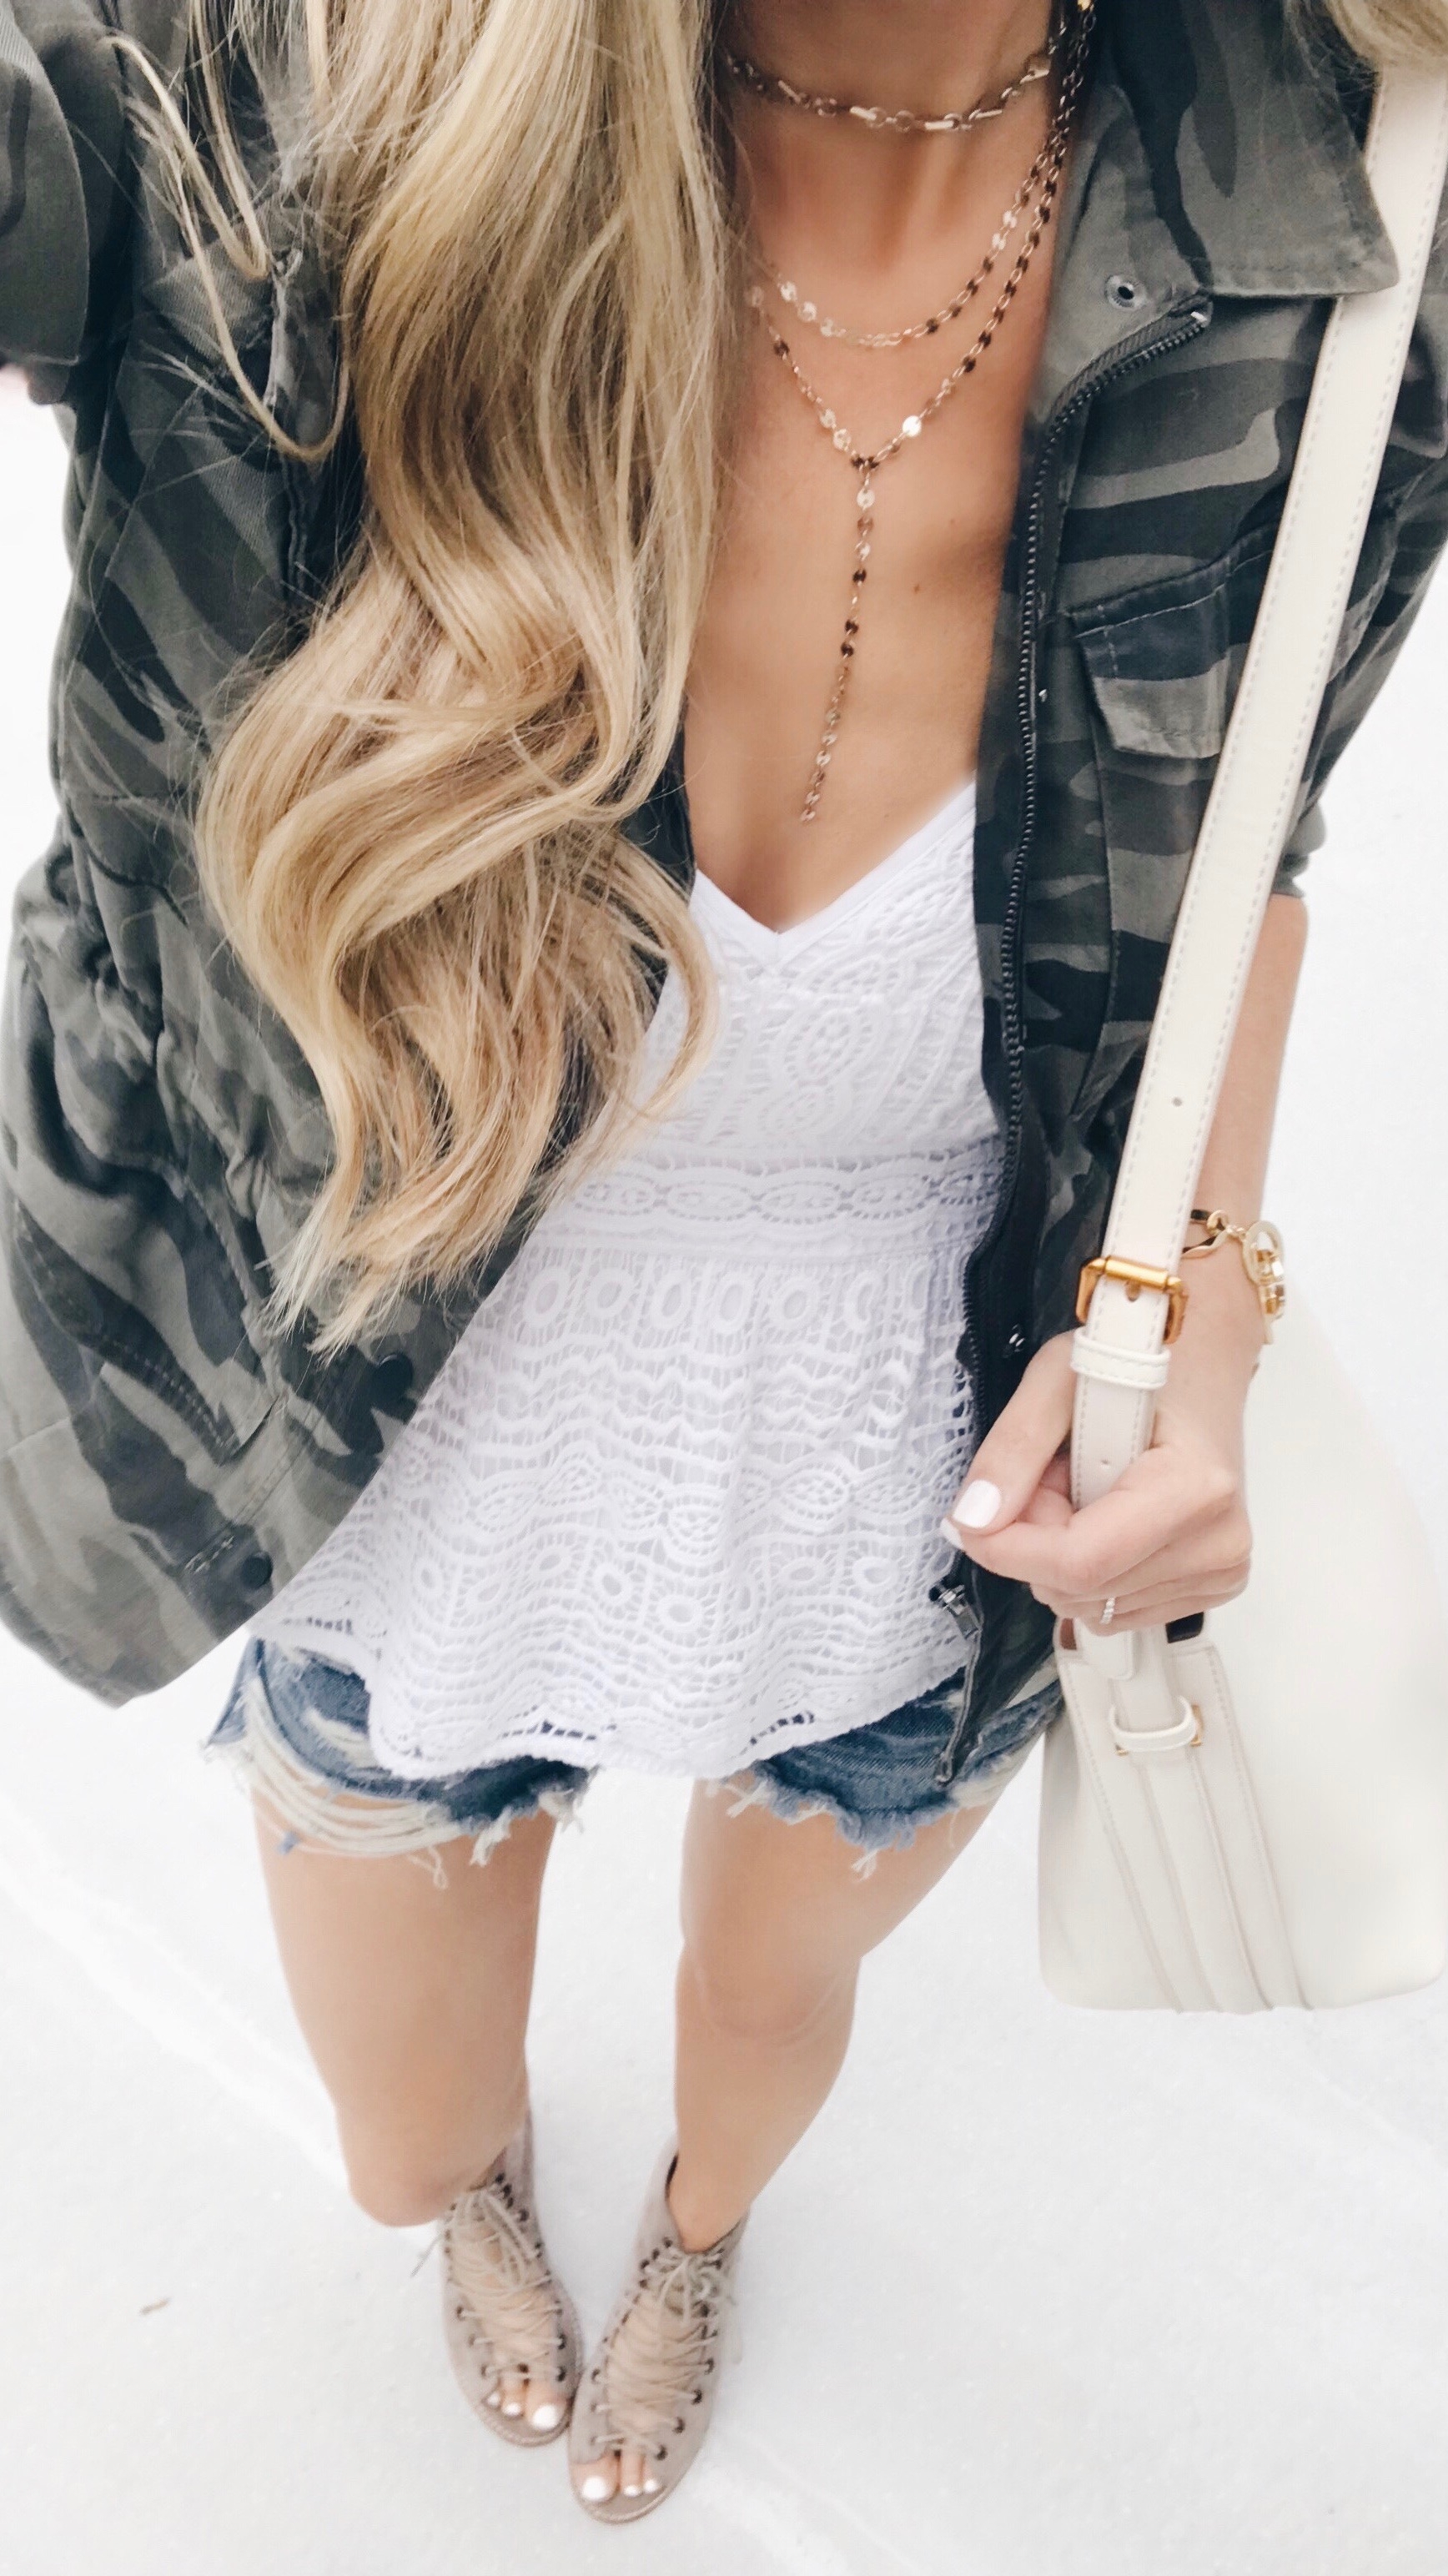 Early Summer Outfits - Camo Jacket/Jean shorts